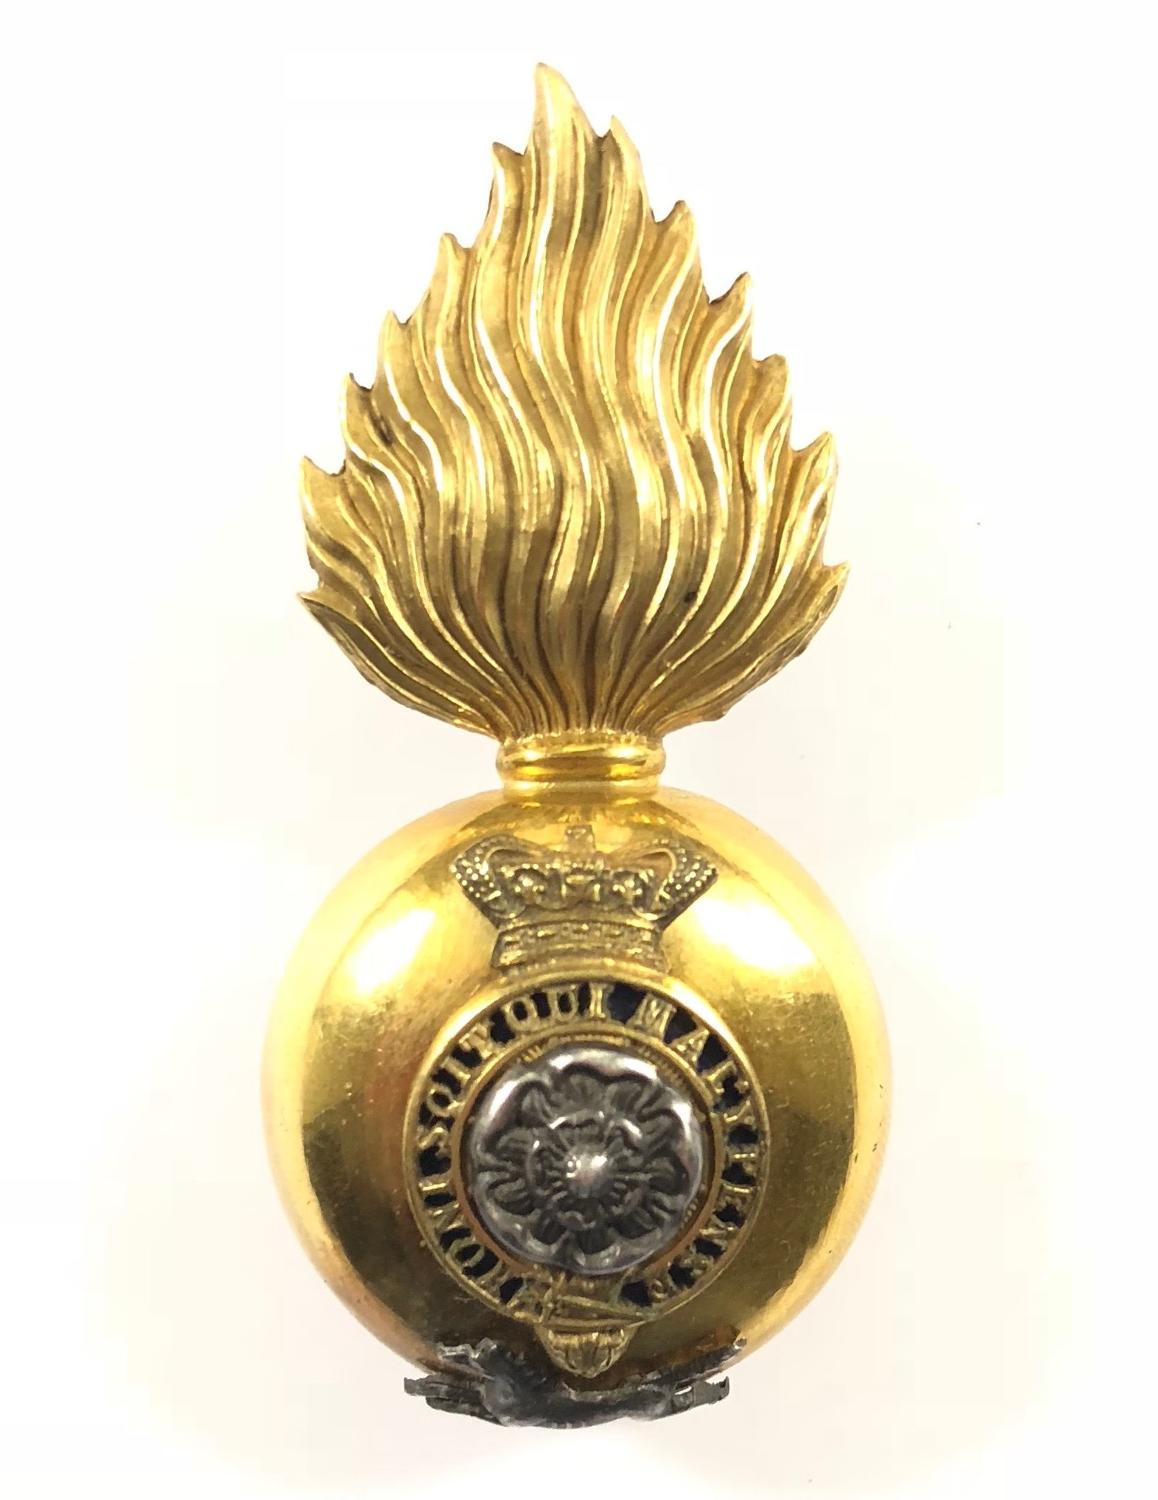 Royal Fusiliers (City of London Regiment), Officer’s glengarry badge